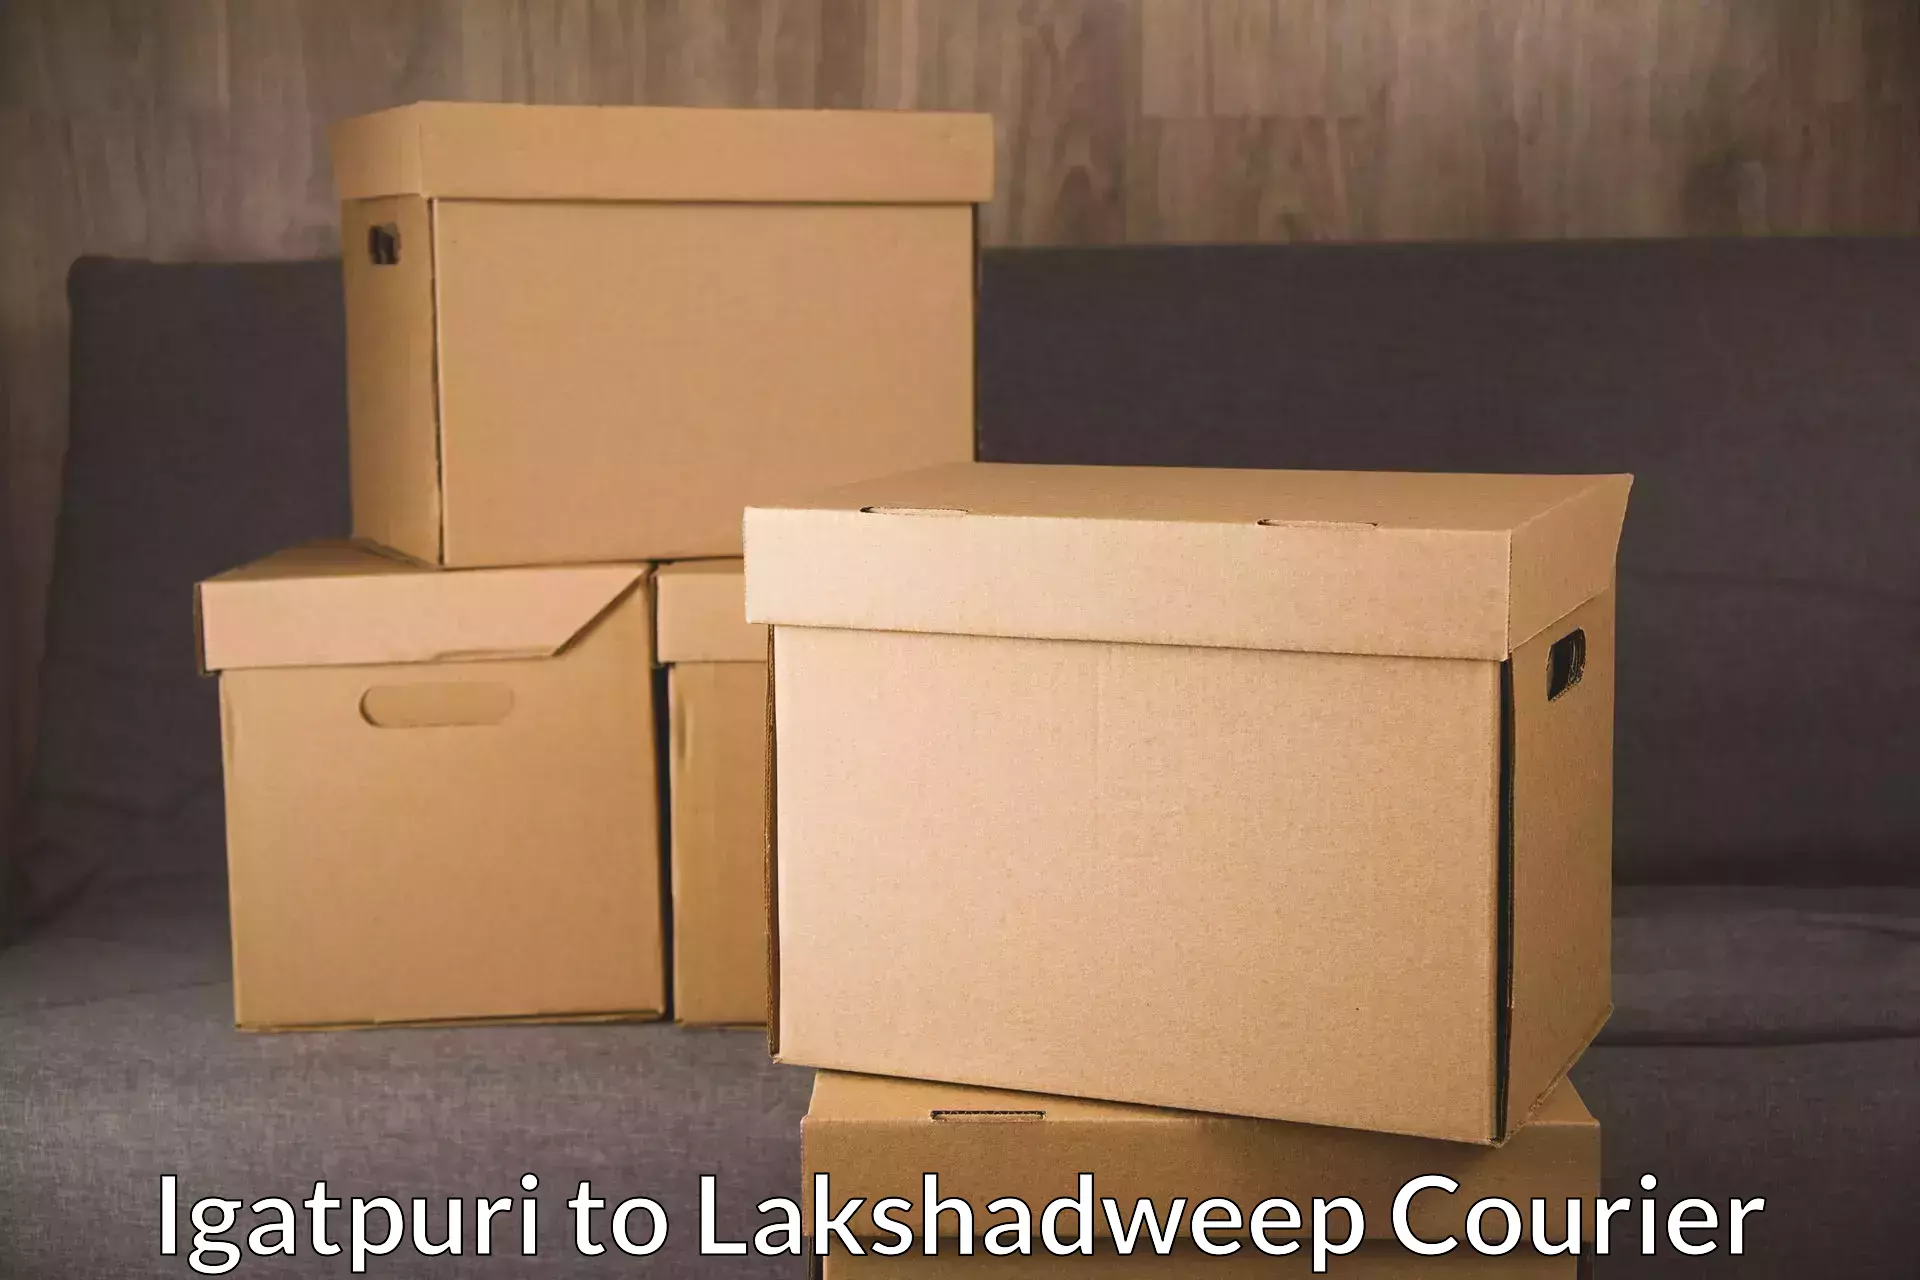 Fast delivery service in Igatpuri to Lakshadweep